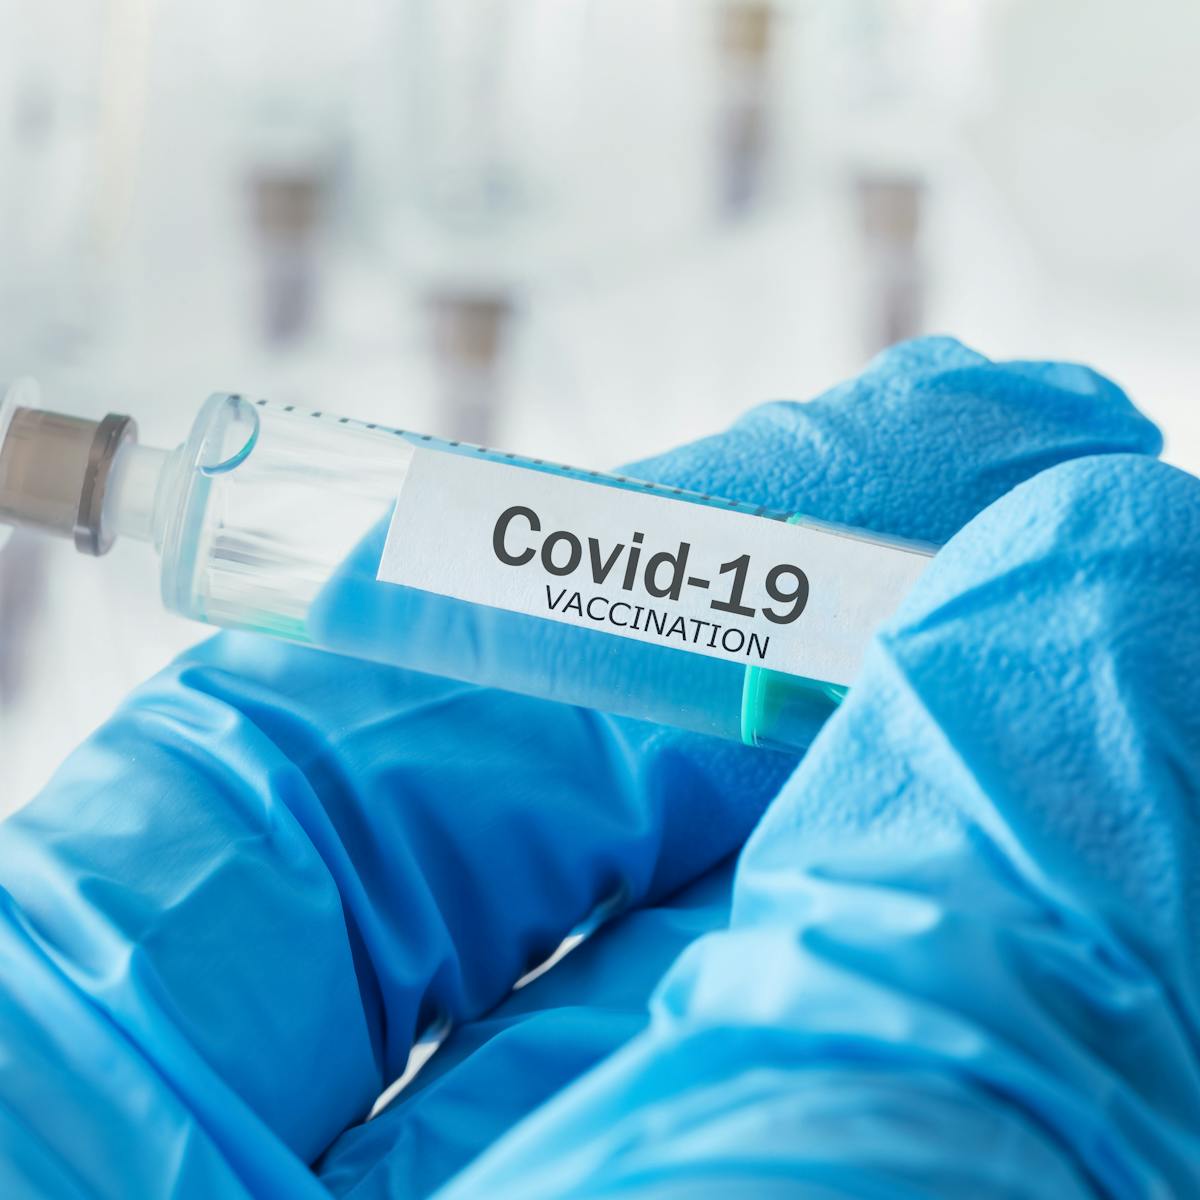 What scientists are doing to develop a vaccine for the new coronavirus